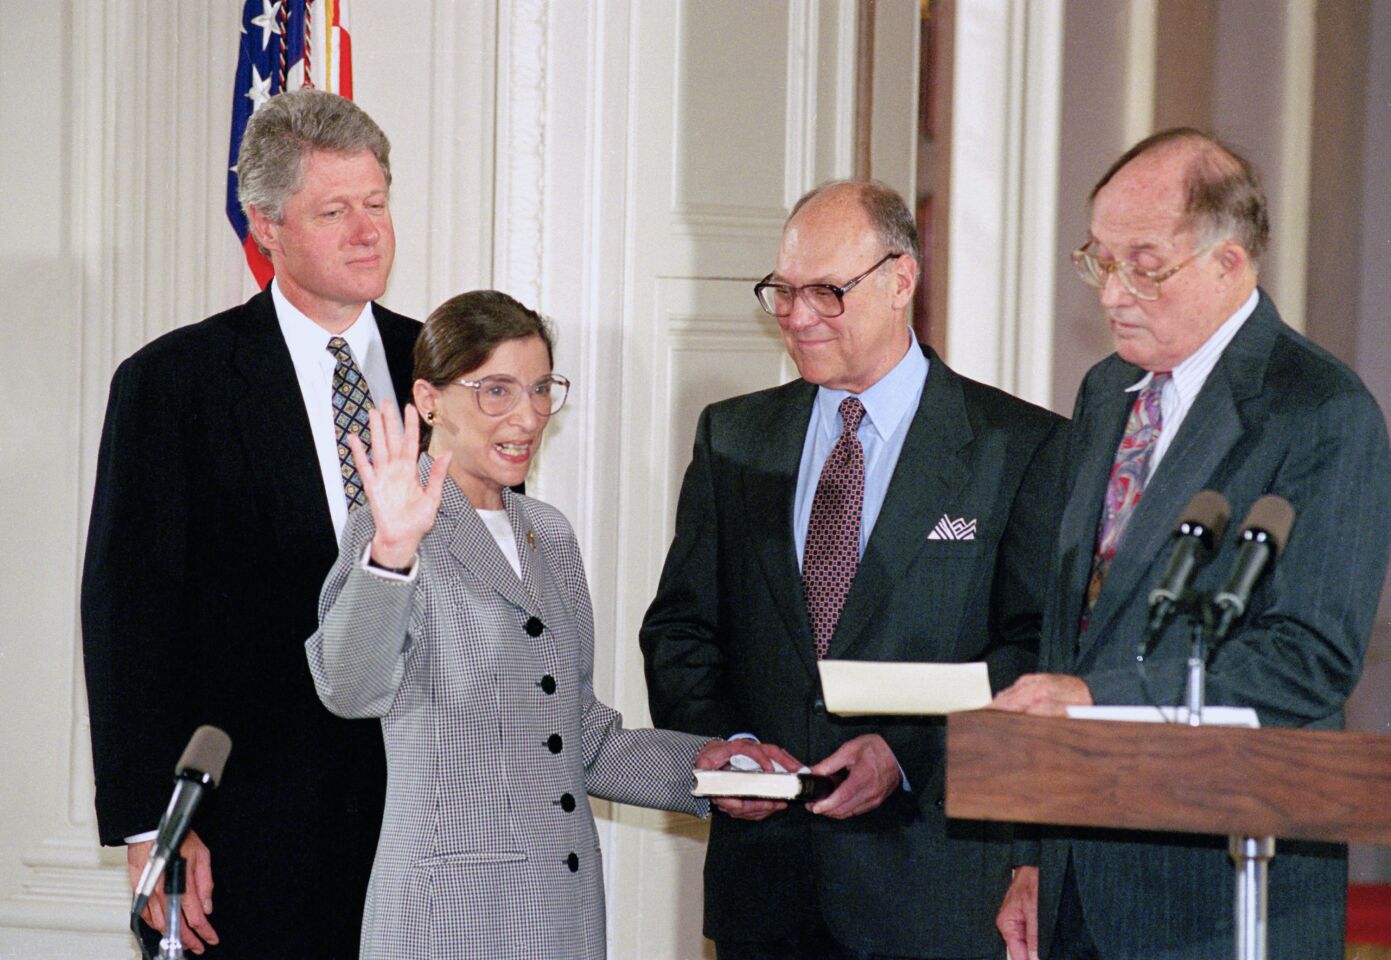 Justice Ruth Bader Ginsburg raises her right hand, with her left hand on a Bible, while taking her oath in 1993